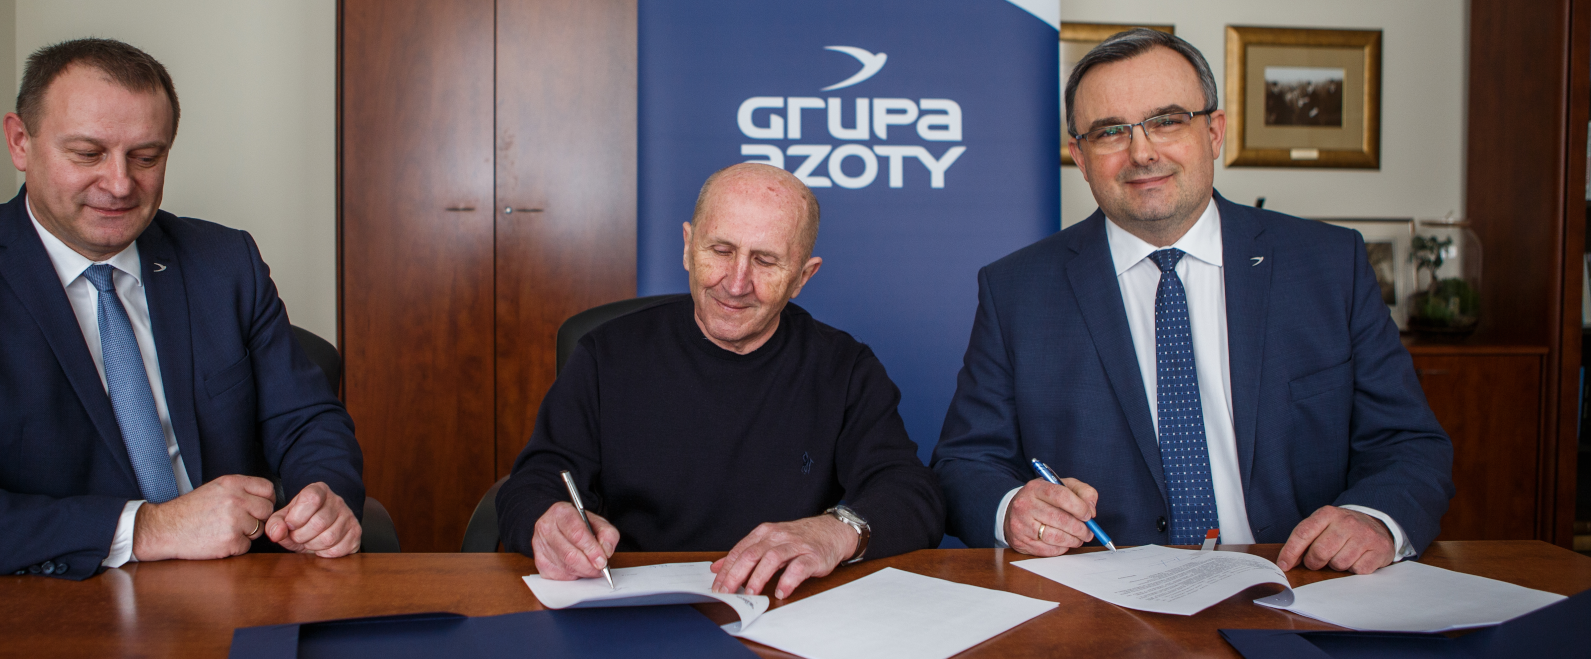 Grupa Azoty continues to support speedway racing in Tarnów